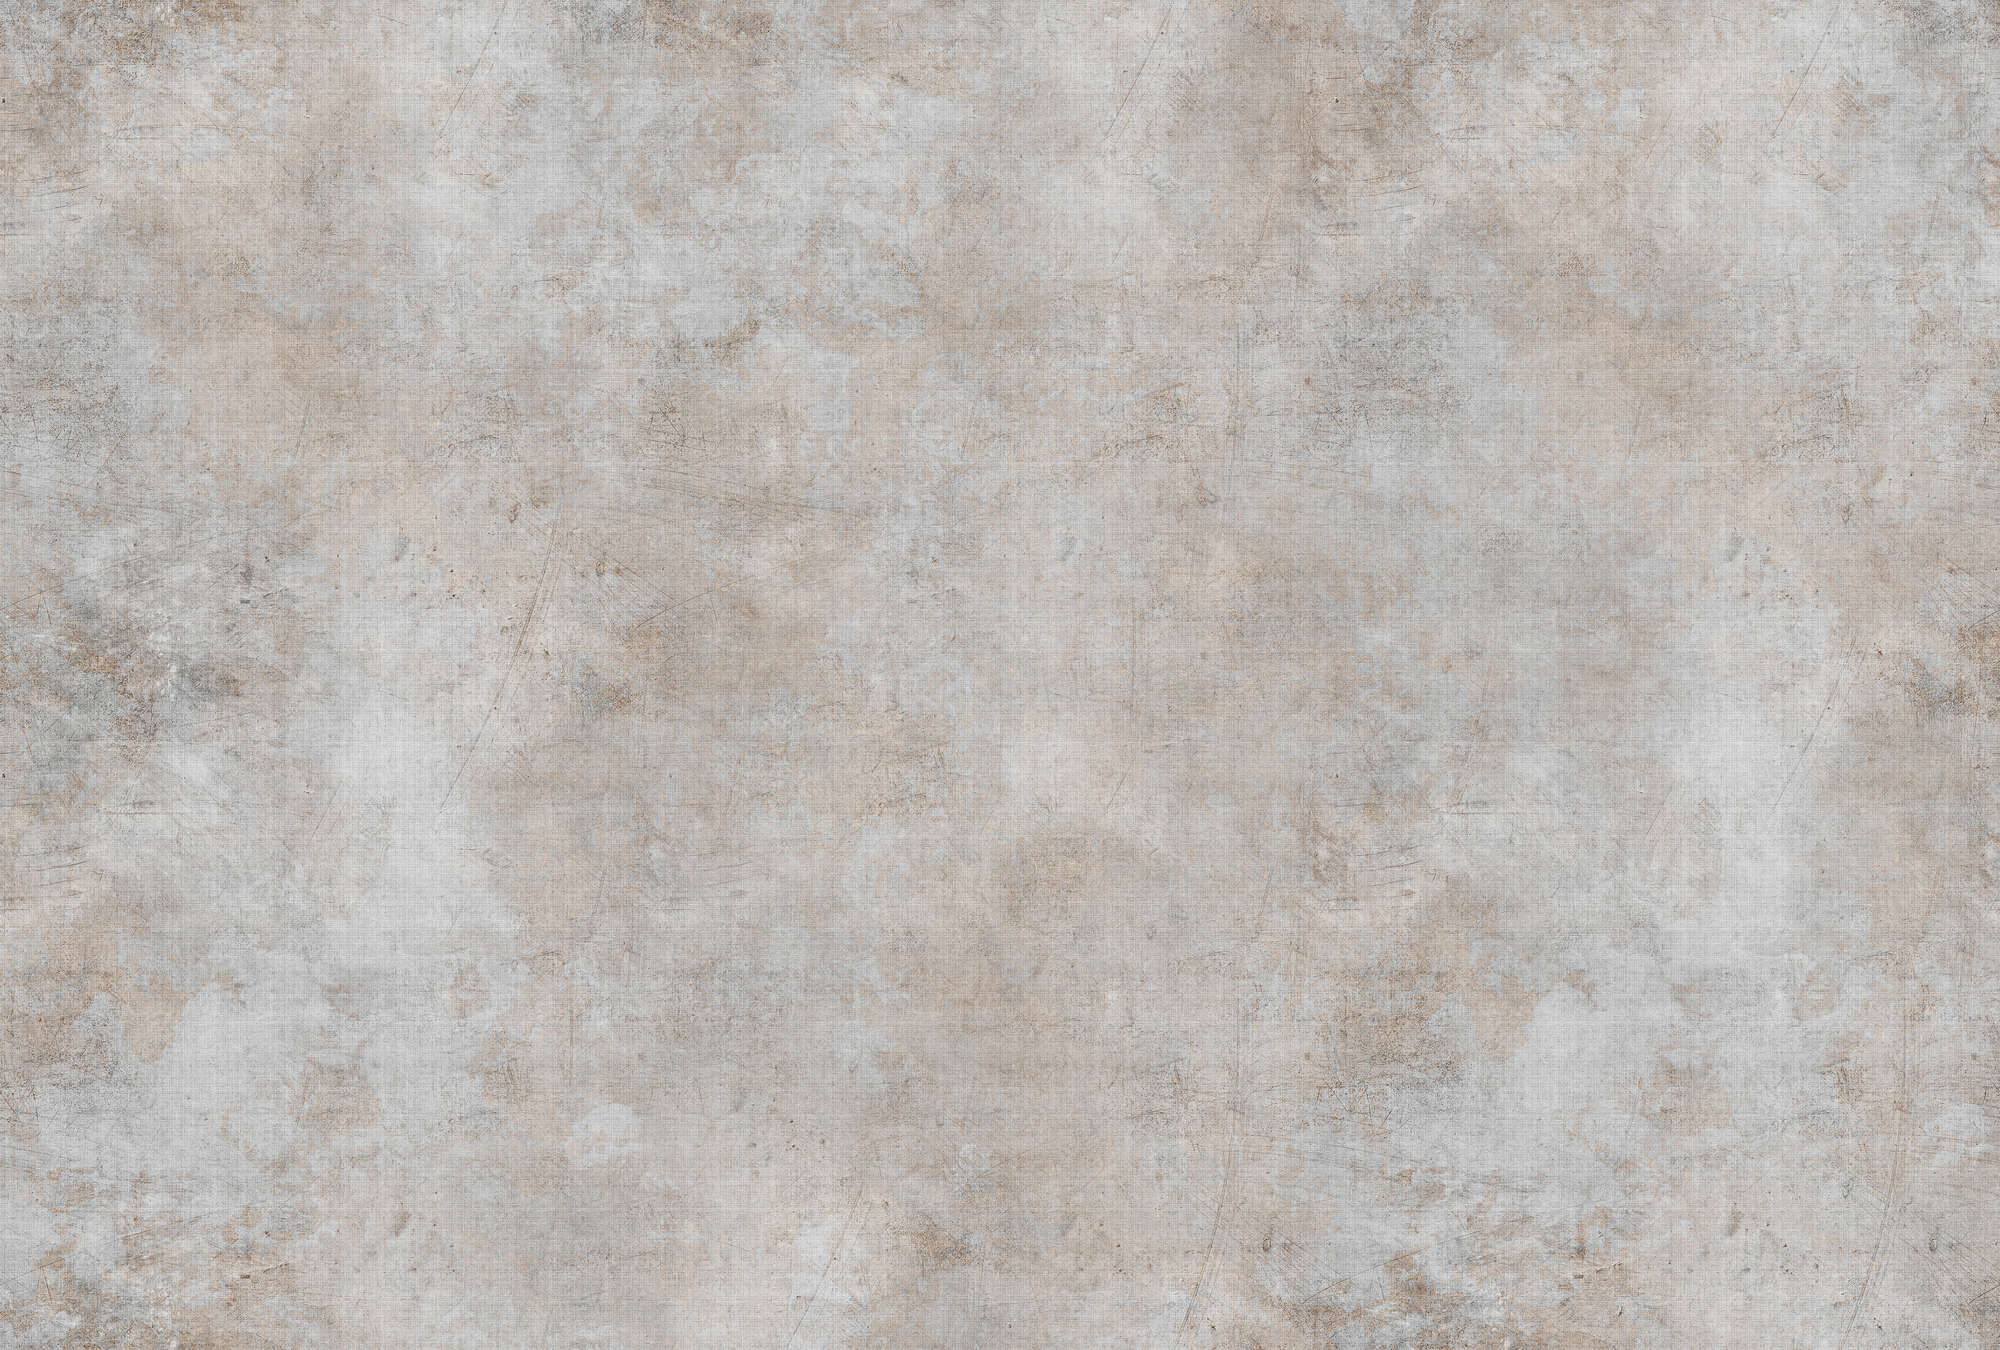             Big three 4 - Concrete and plaster optics as photo wallpaper - natural linen structure - beige, brown | structure non-woven
        